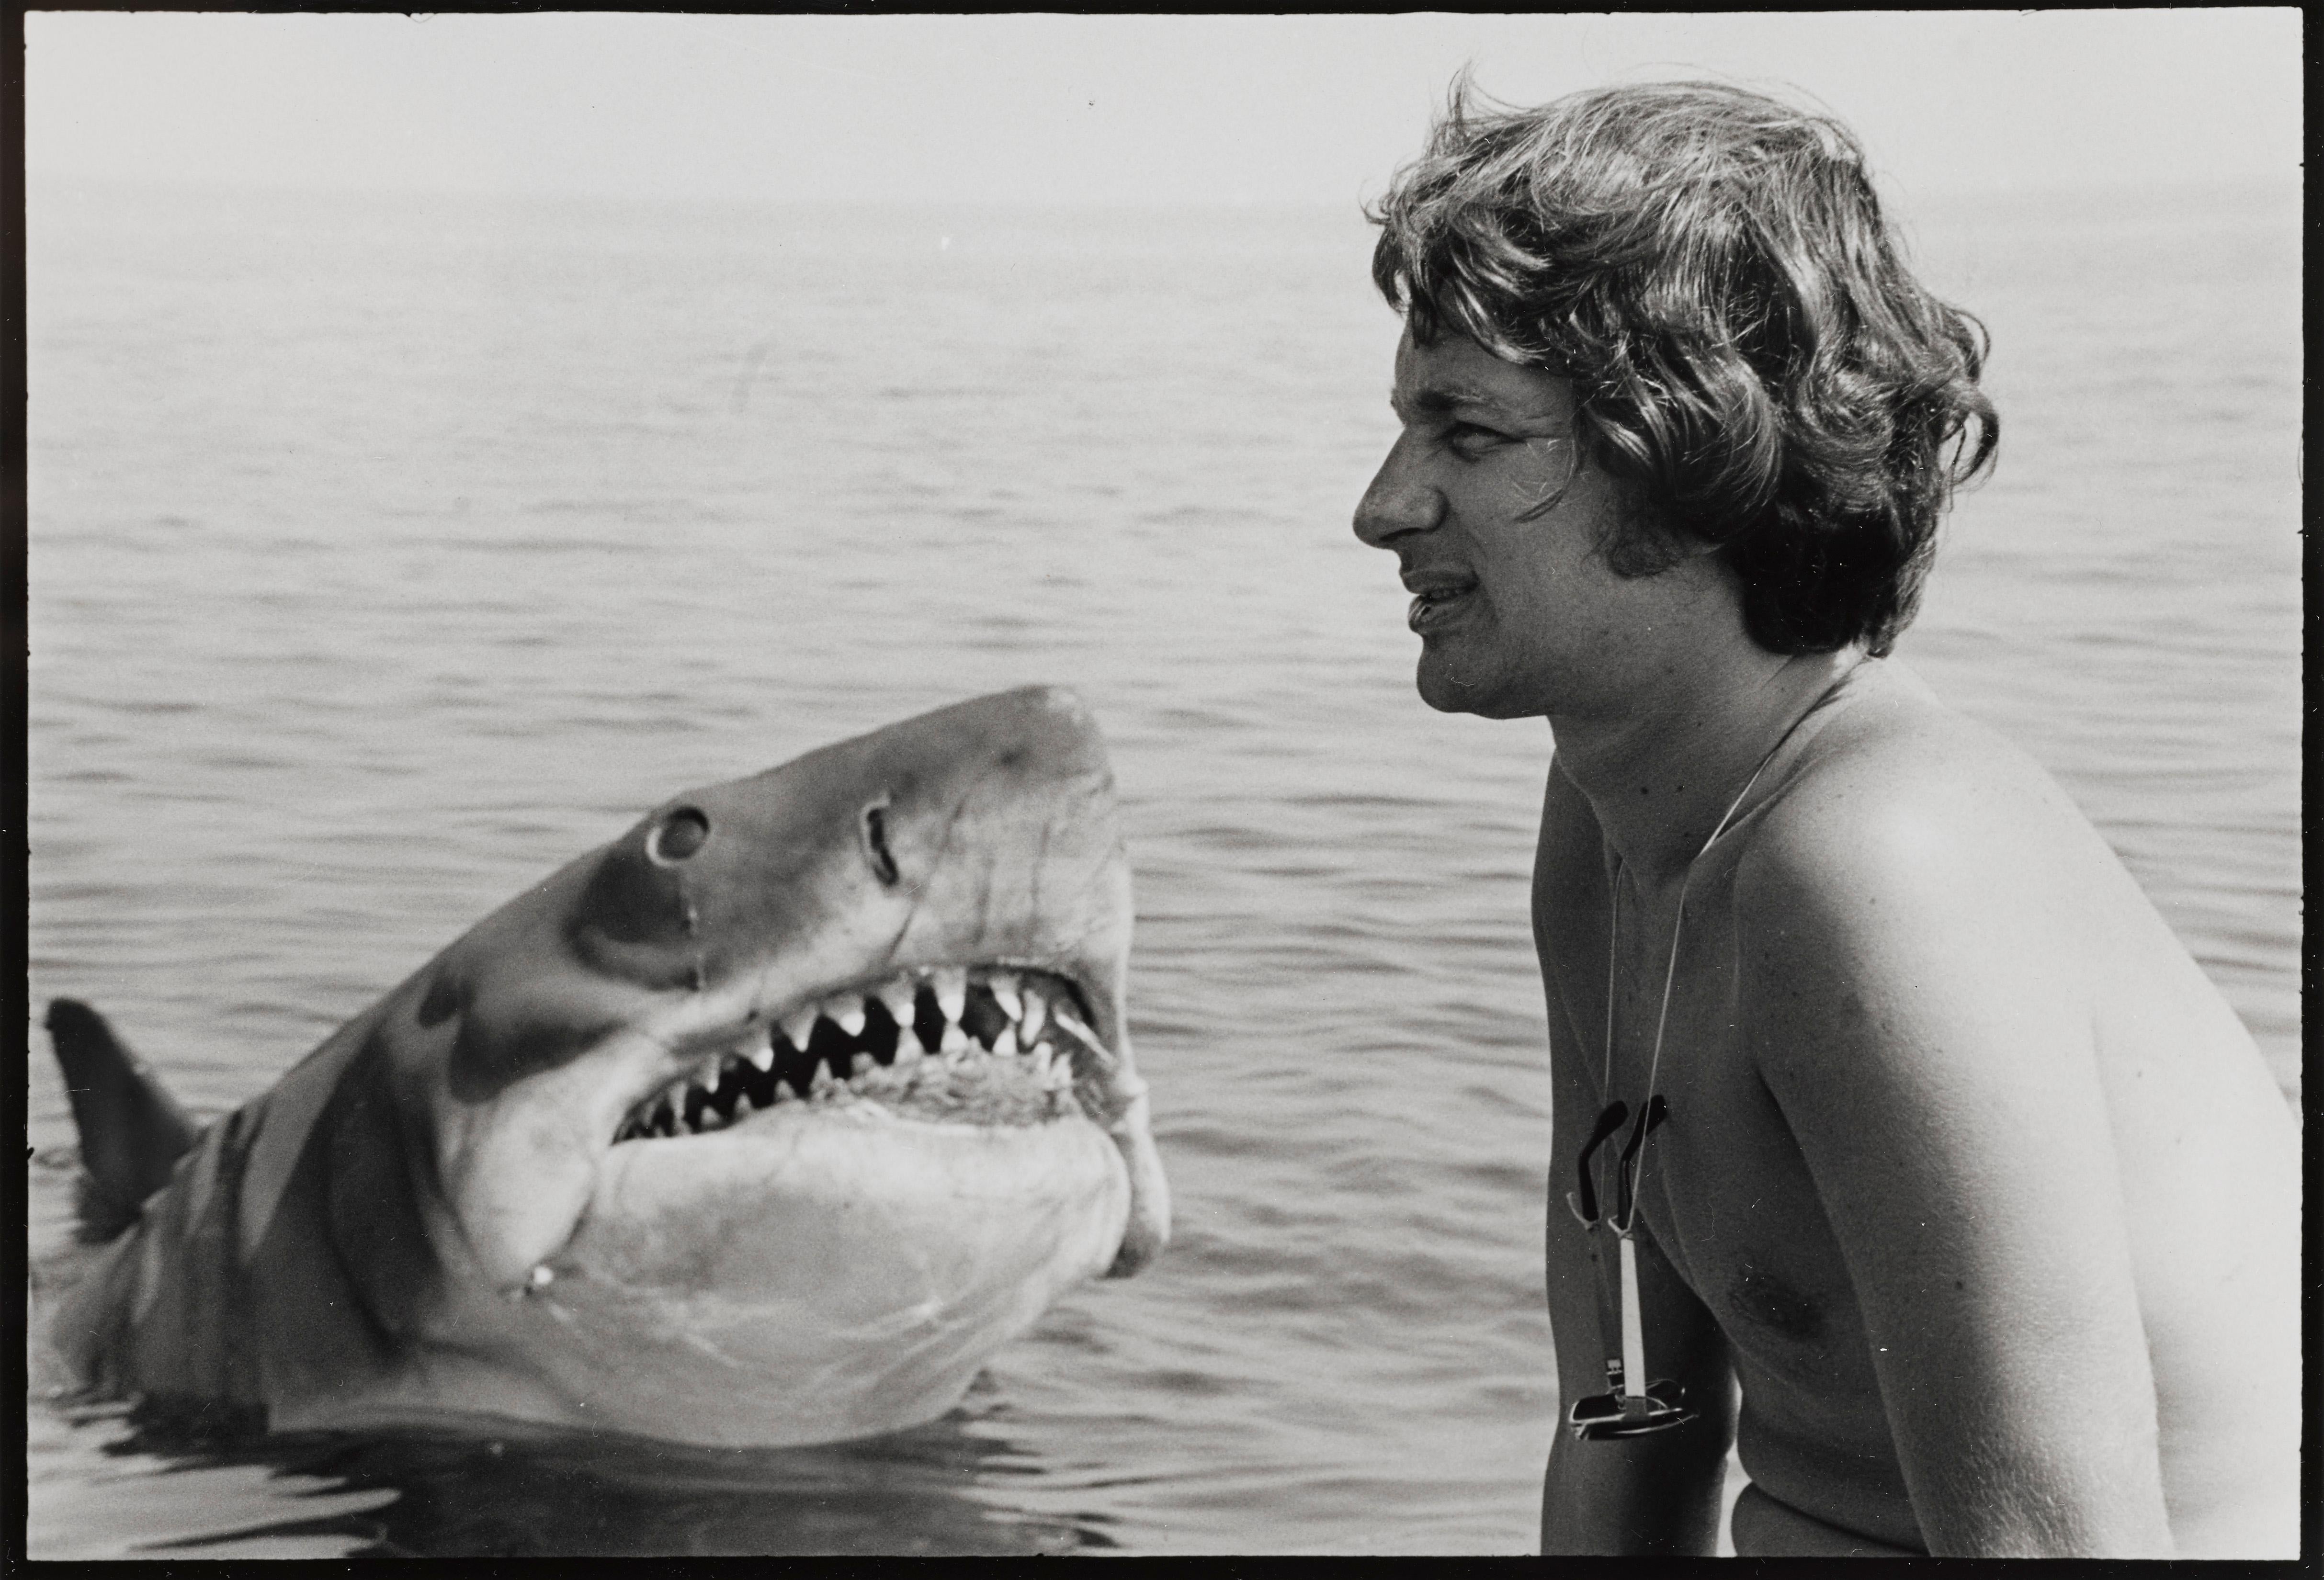 Jaws (1975) this is a deluxe hand printed candid file photo showing Spielberg squatting by Bruce the shark.
This photographs was taken during rehearsals.
    